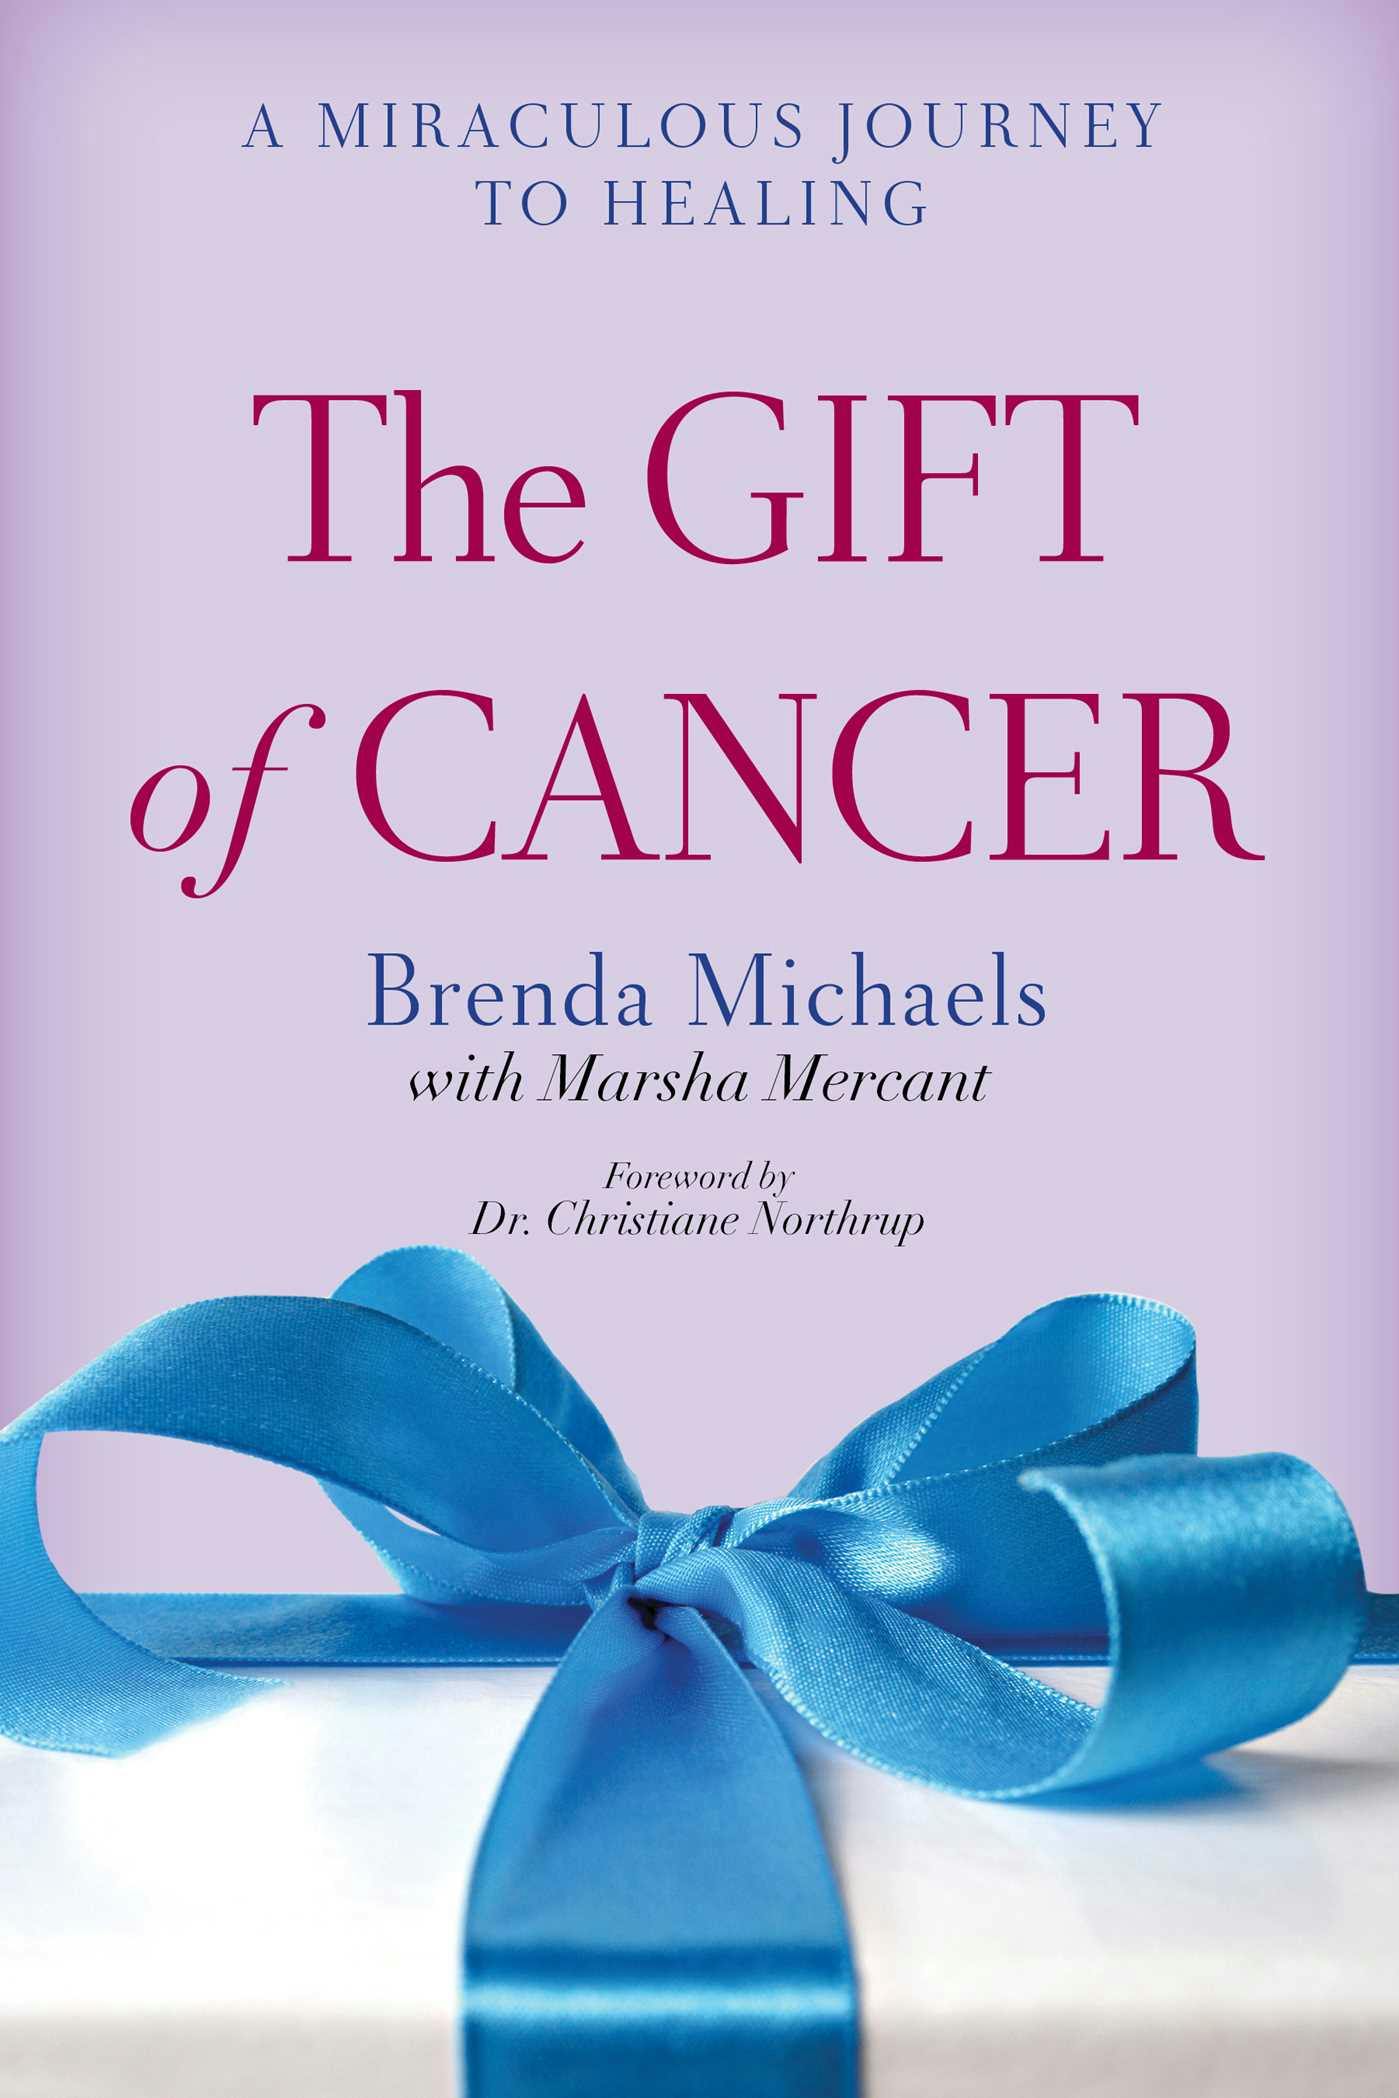 The Gift of Cancer: A Miraculous Journey to Healing - Brenda Michaels, Marsha Mercant